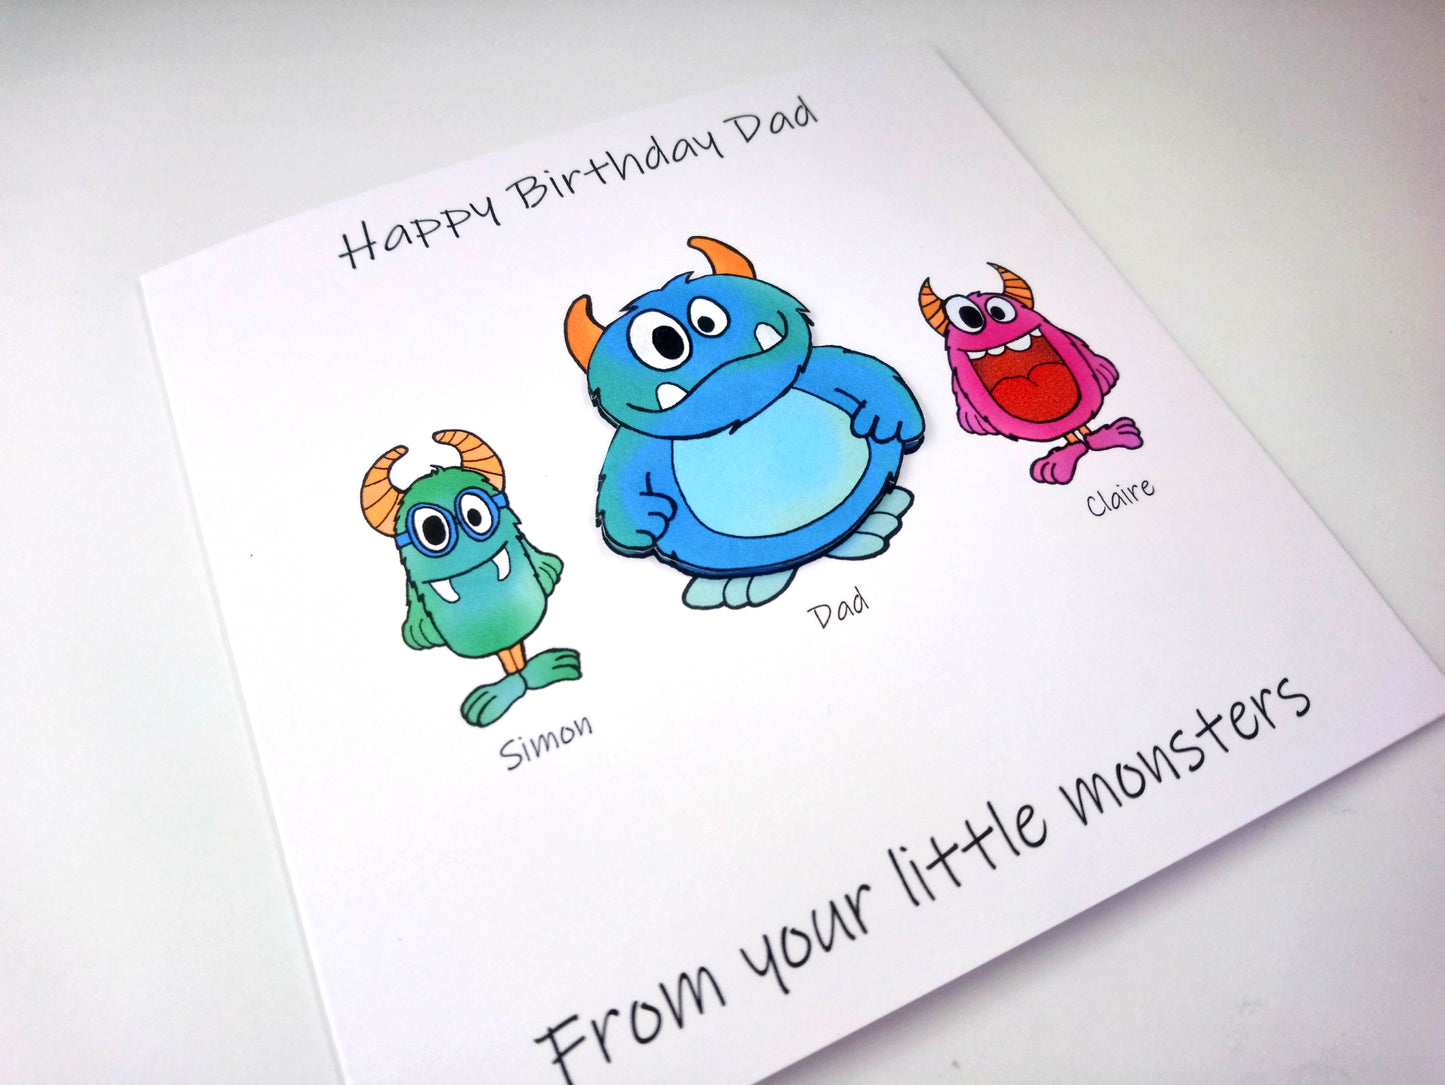 PERSONALISED Daddy From the Little Monsters Birthday Card